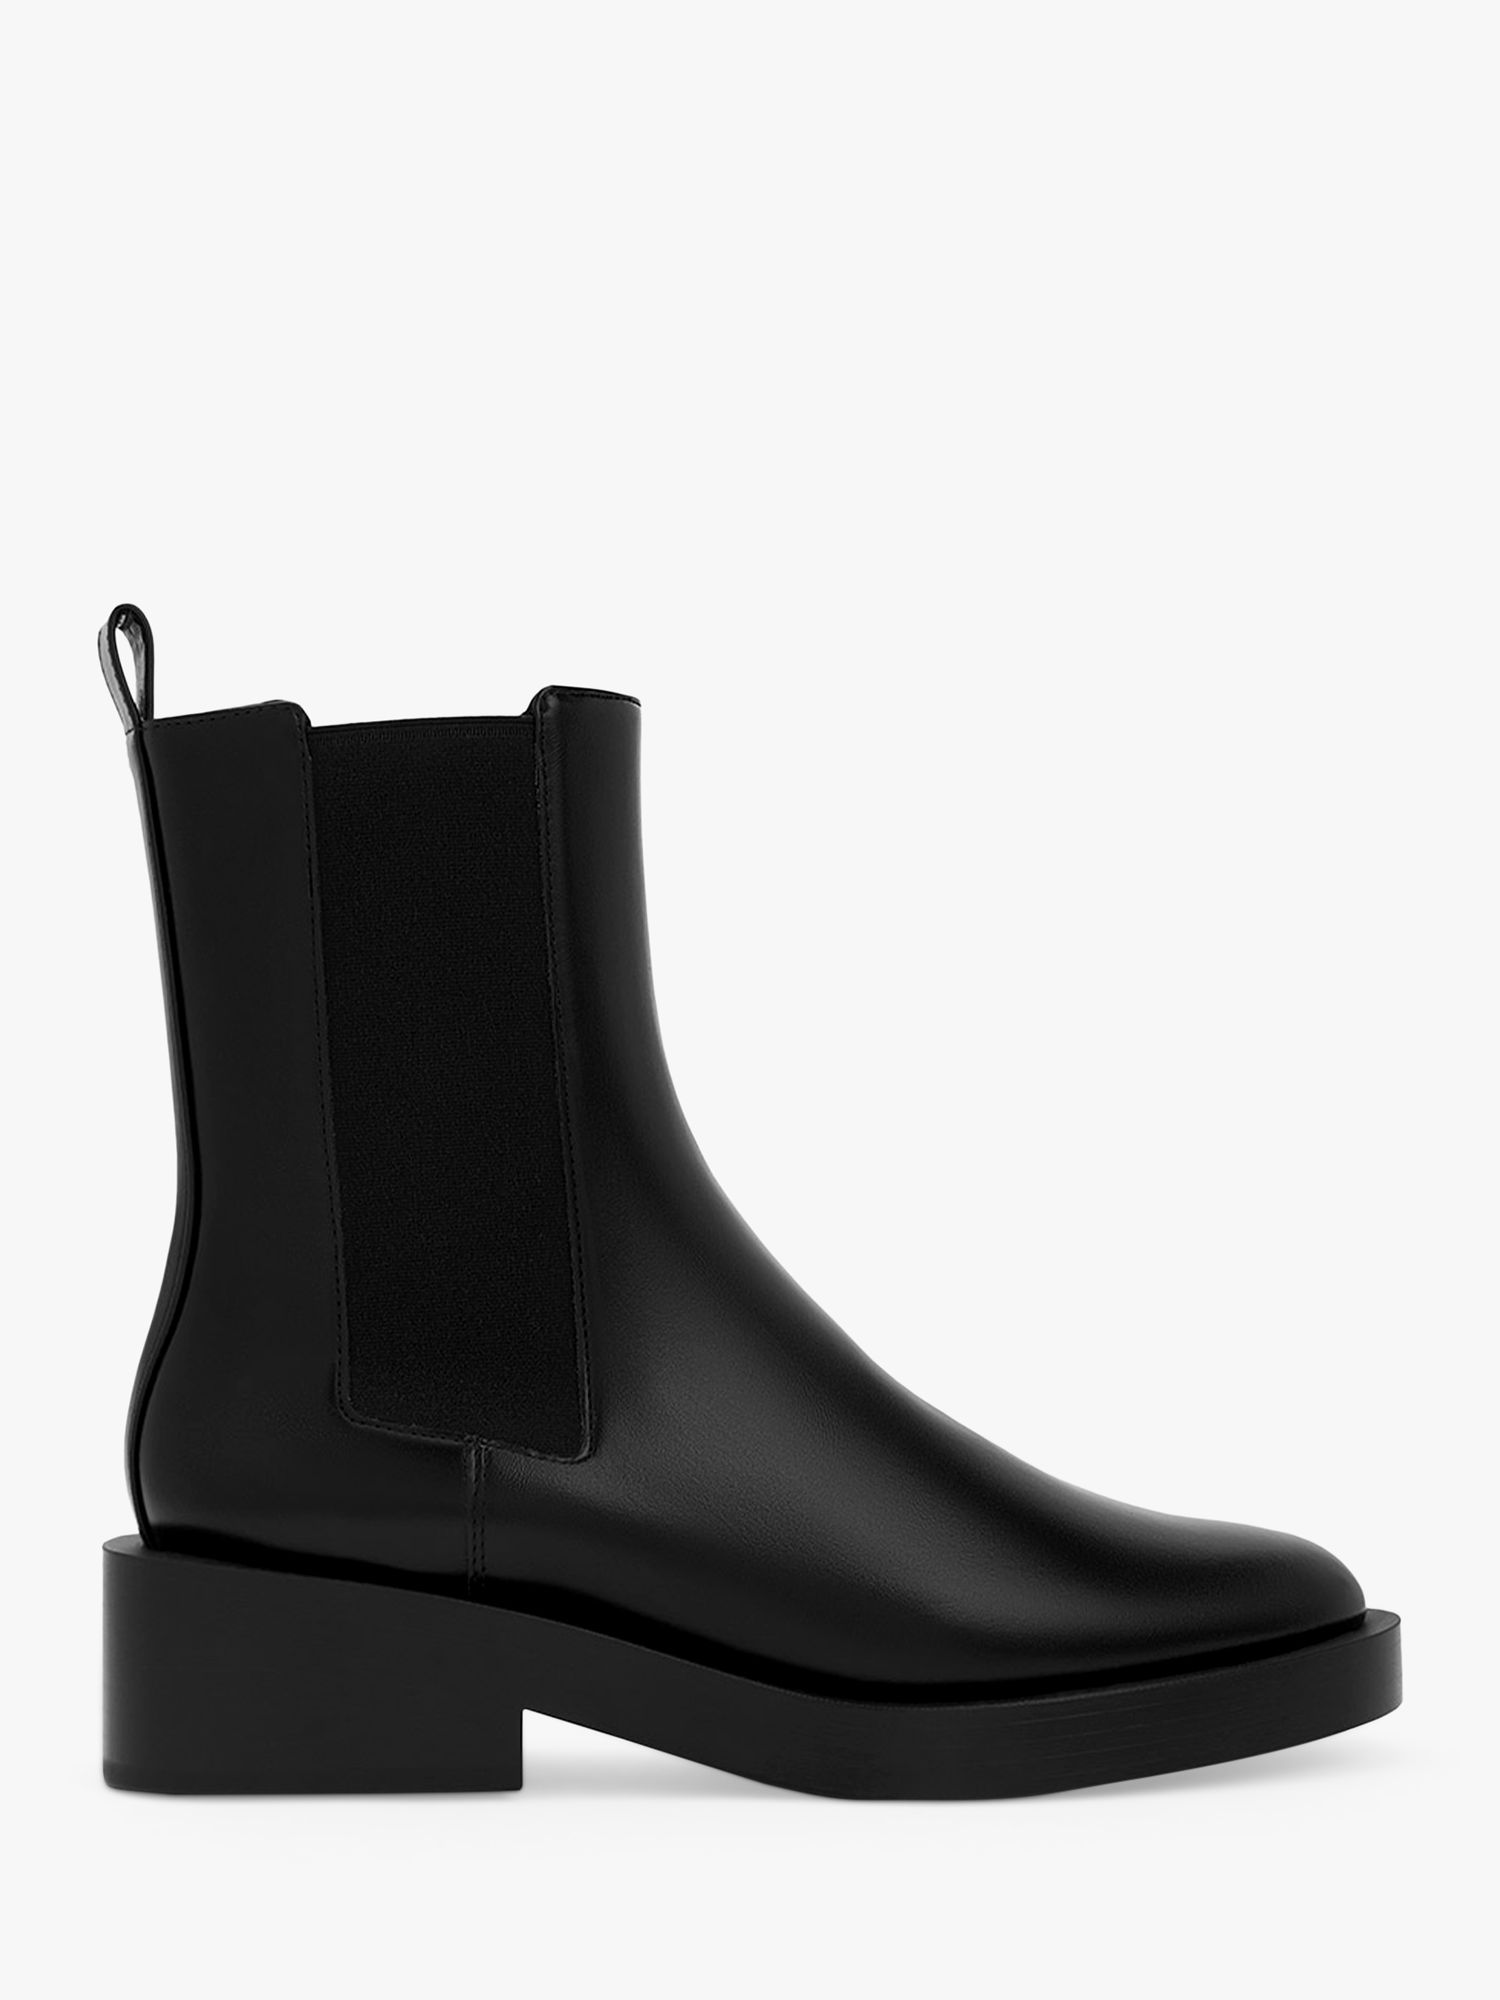 CHARLES & KEITH Chelsea Boots, Black at John Lewis & Partners